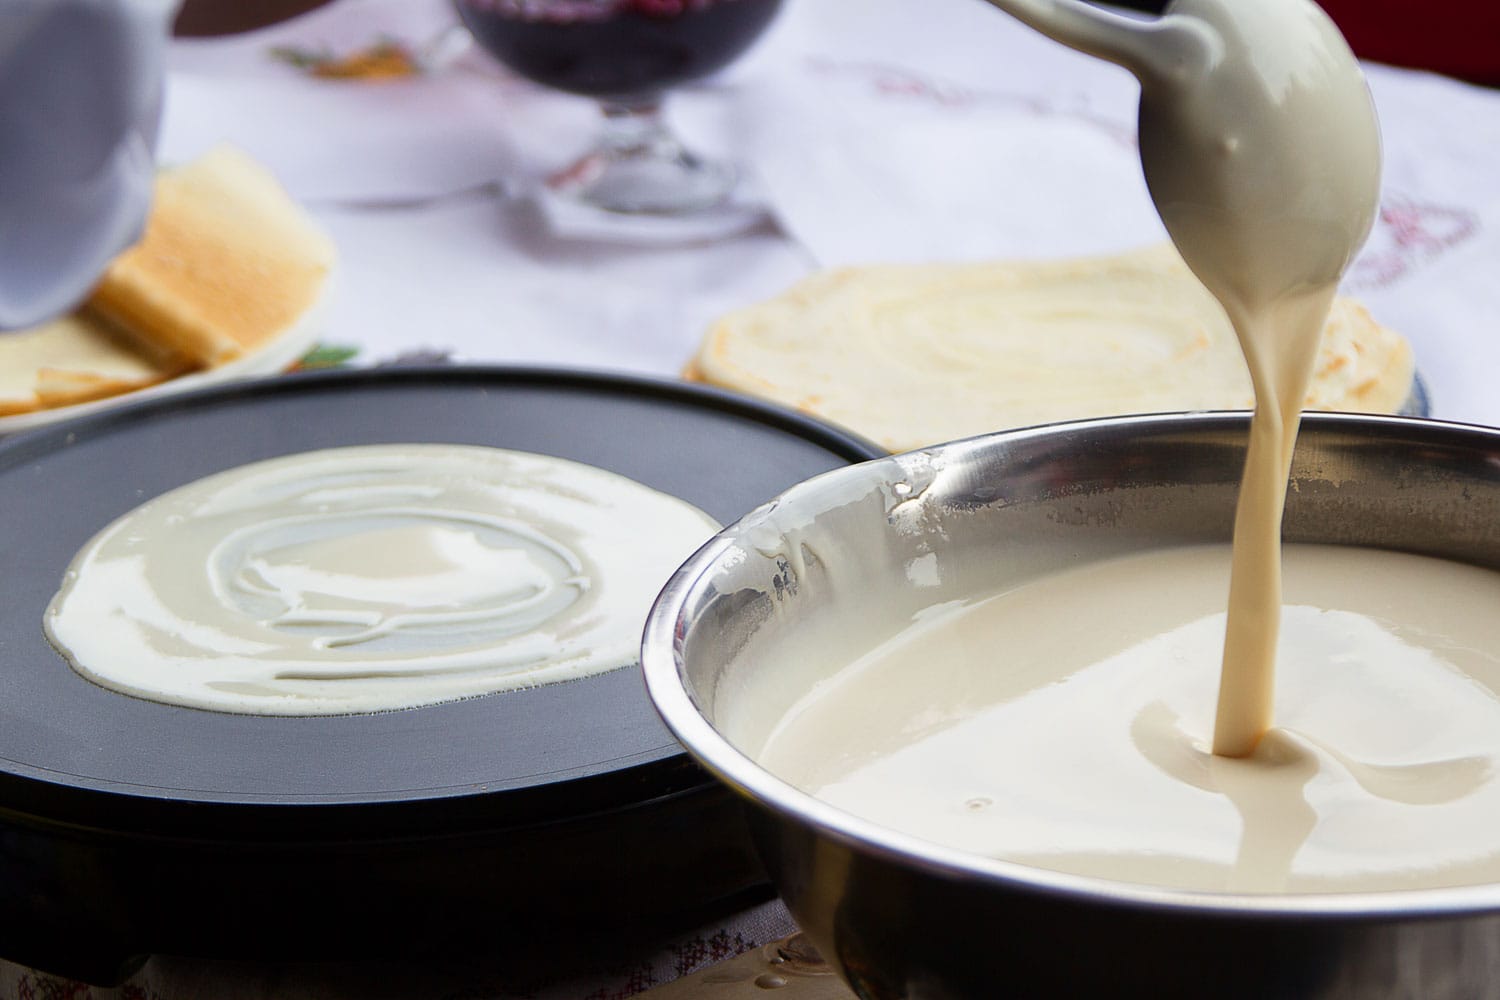 Pour batter for pancakes into a frying pan 